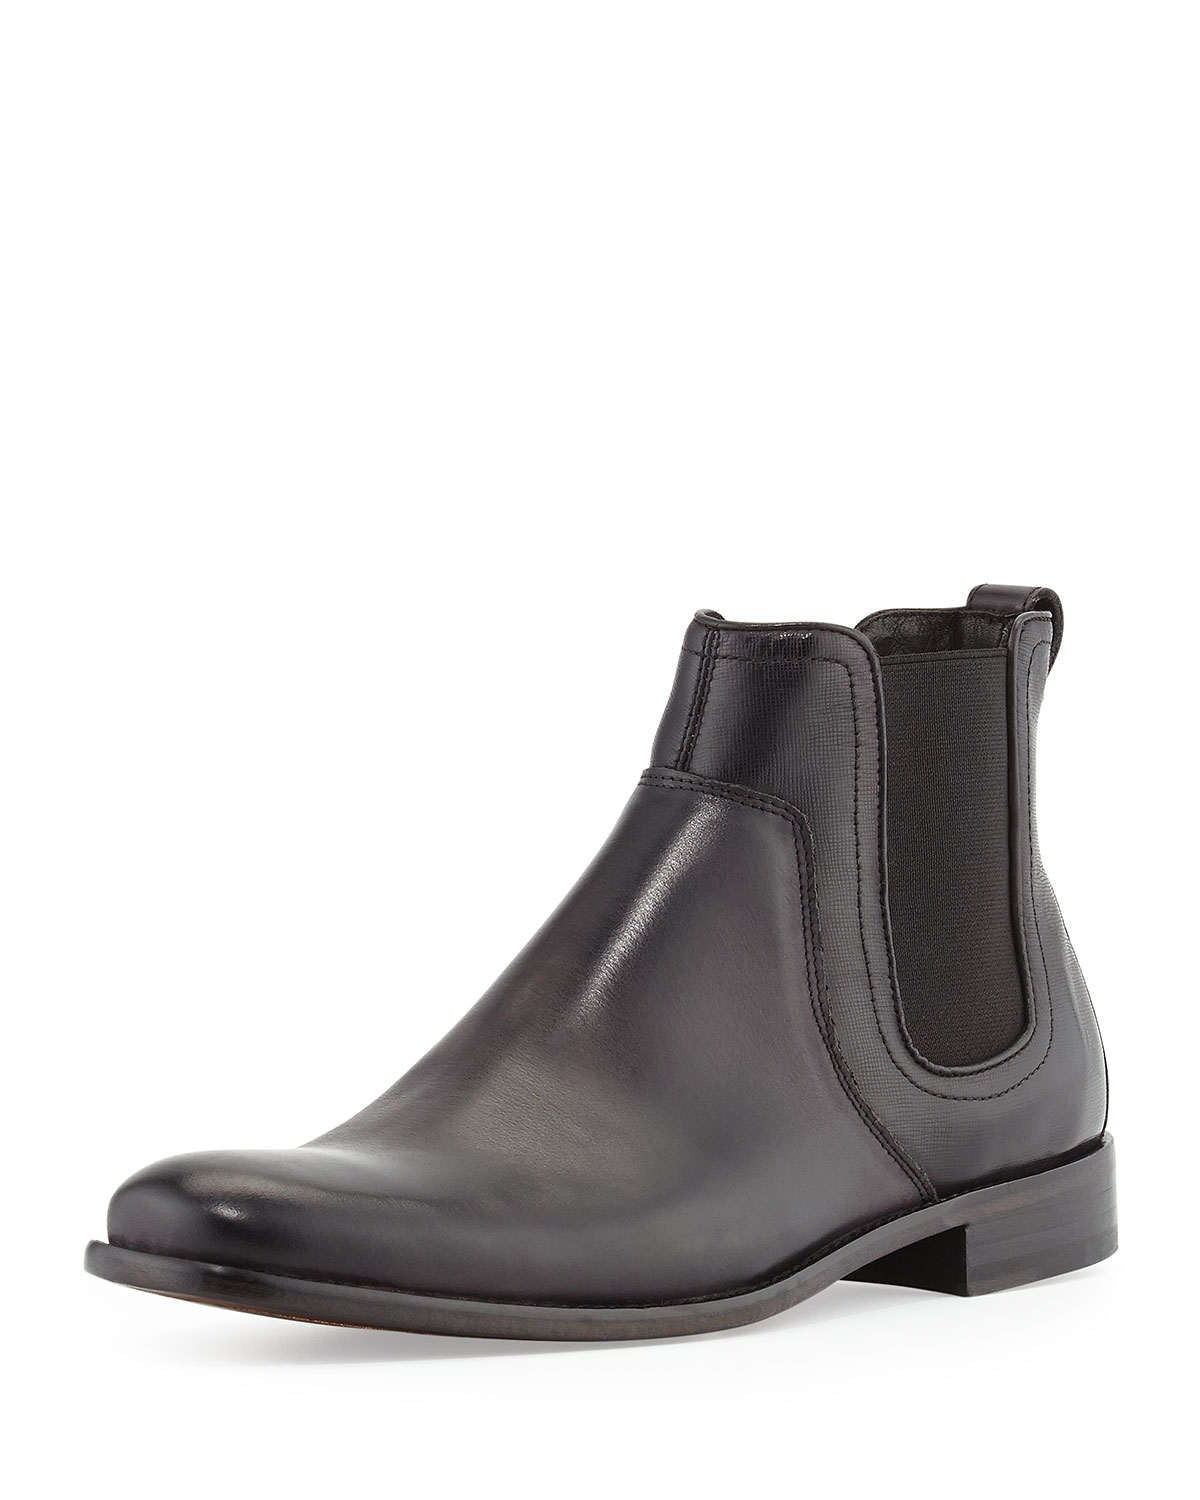 Lyst - John varvatos Leather Luxe Chelsea Boot in Black for Men